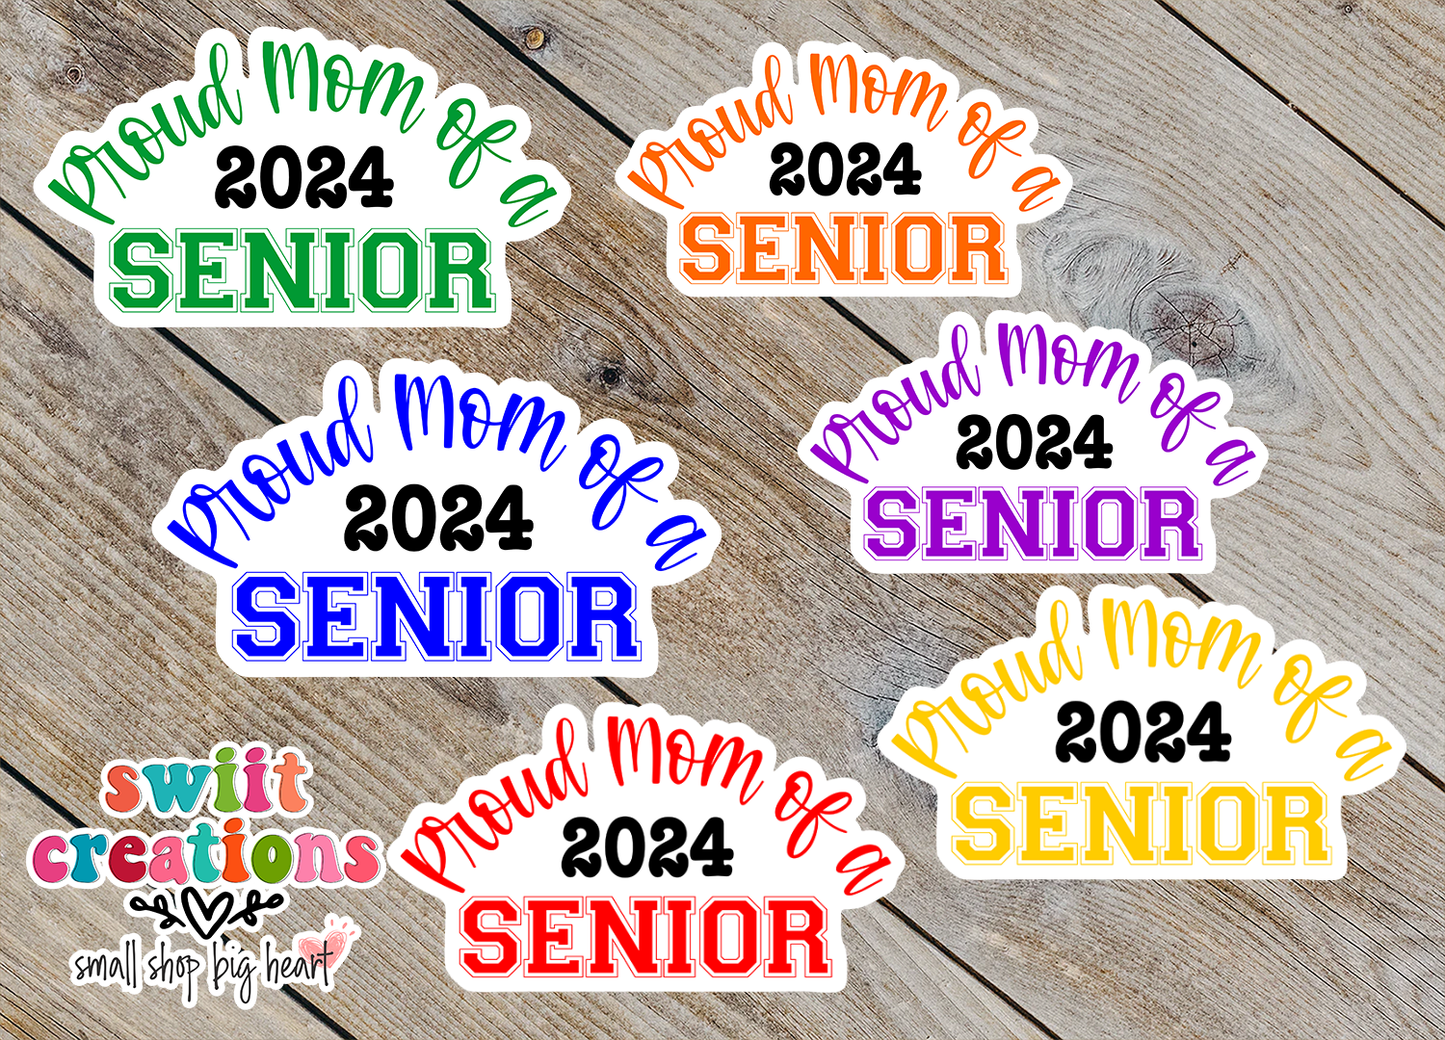 Proud Mom of a 2024 Senior Waterproof Sticker - Different Color Options Available (SS719)